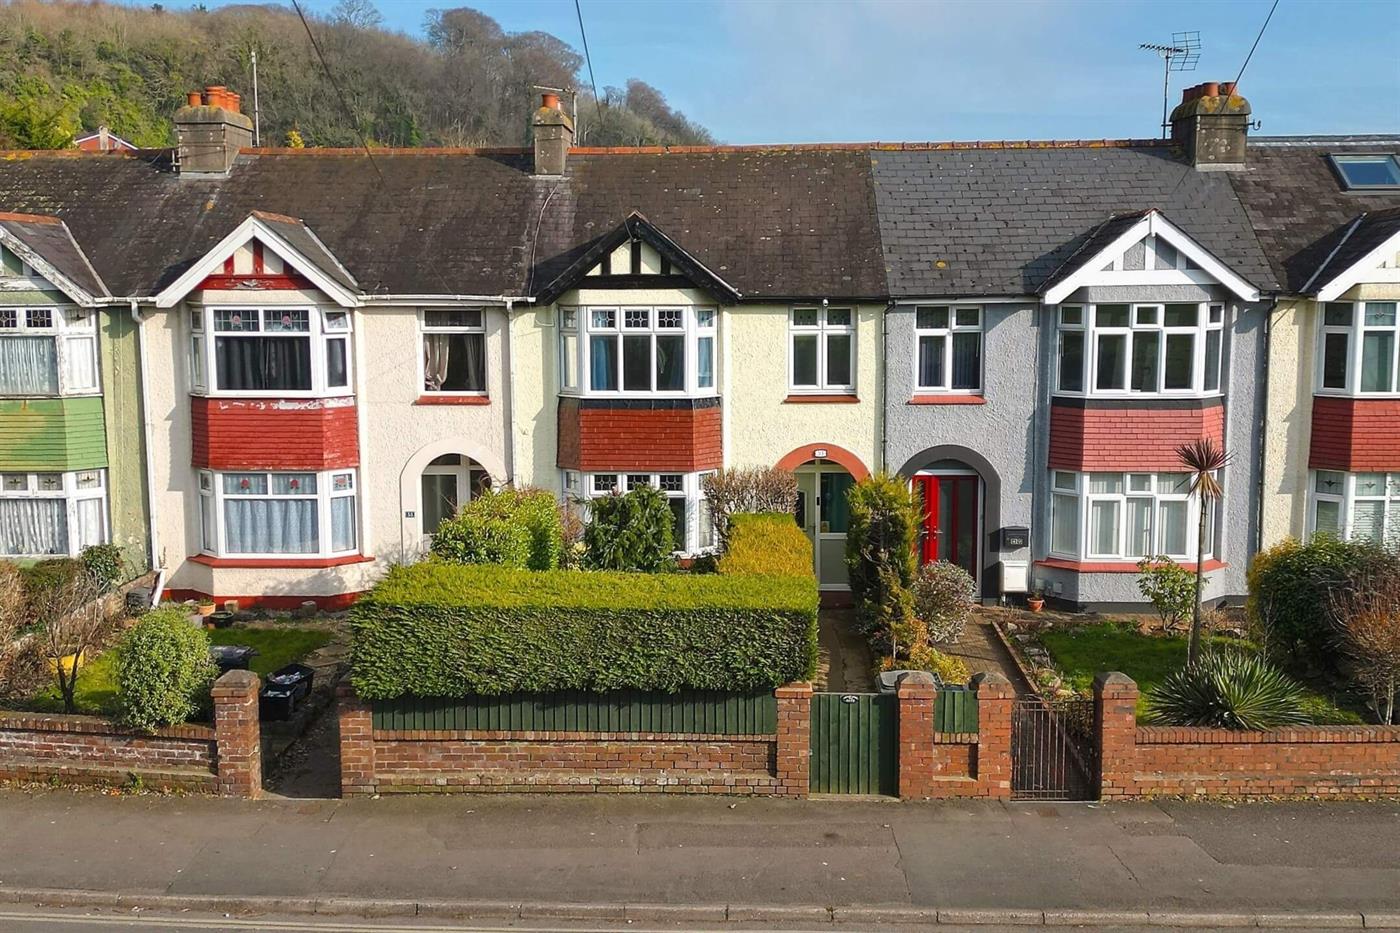 3 Bedroom Terraced House for Sale (Sold): Kings Ash Road, Paignton, TQ3 3TY